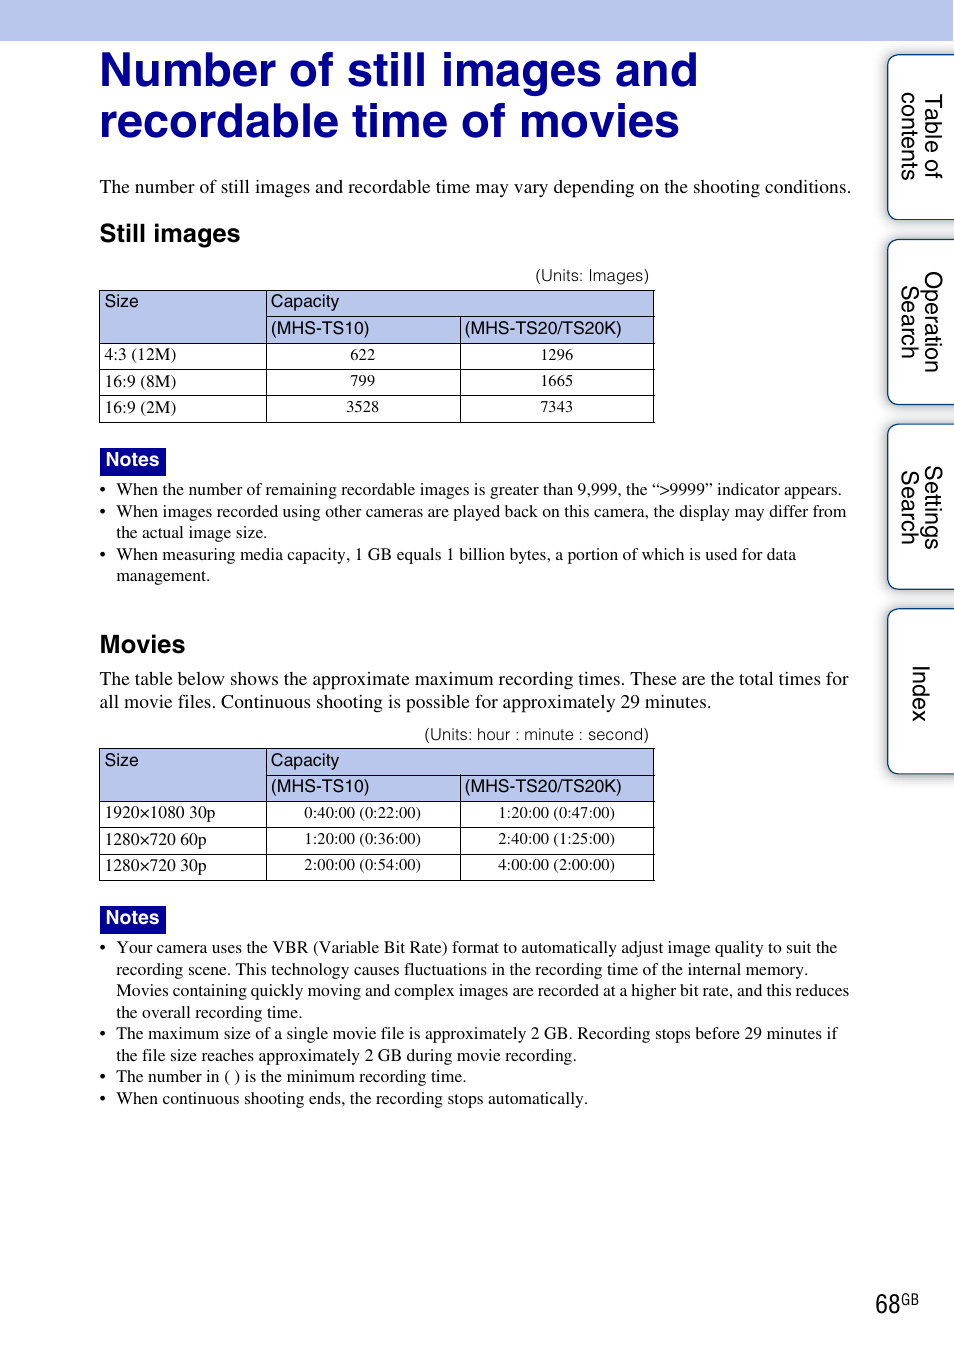 Still images, Movies | Sony bloggie MHS-TS20К User Manual | Page 68 / 73